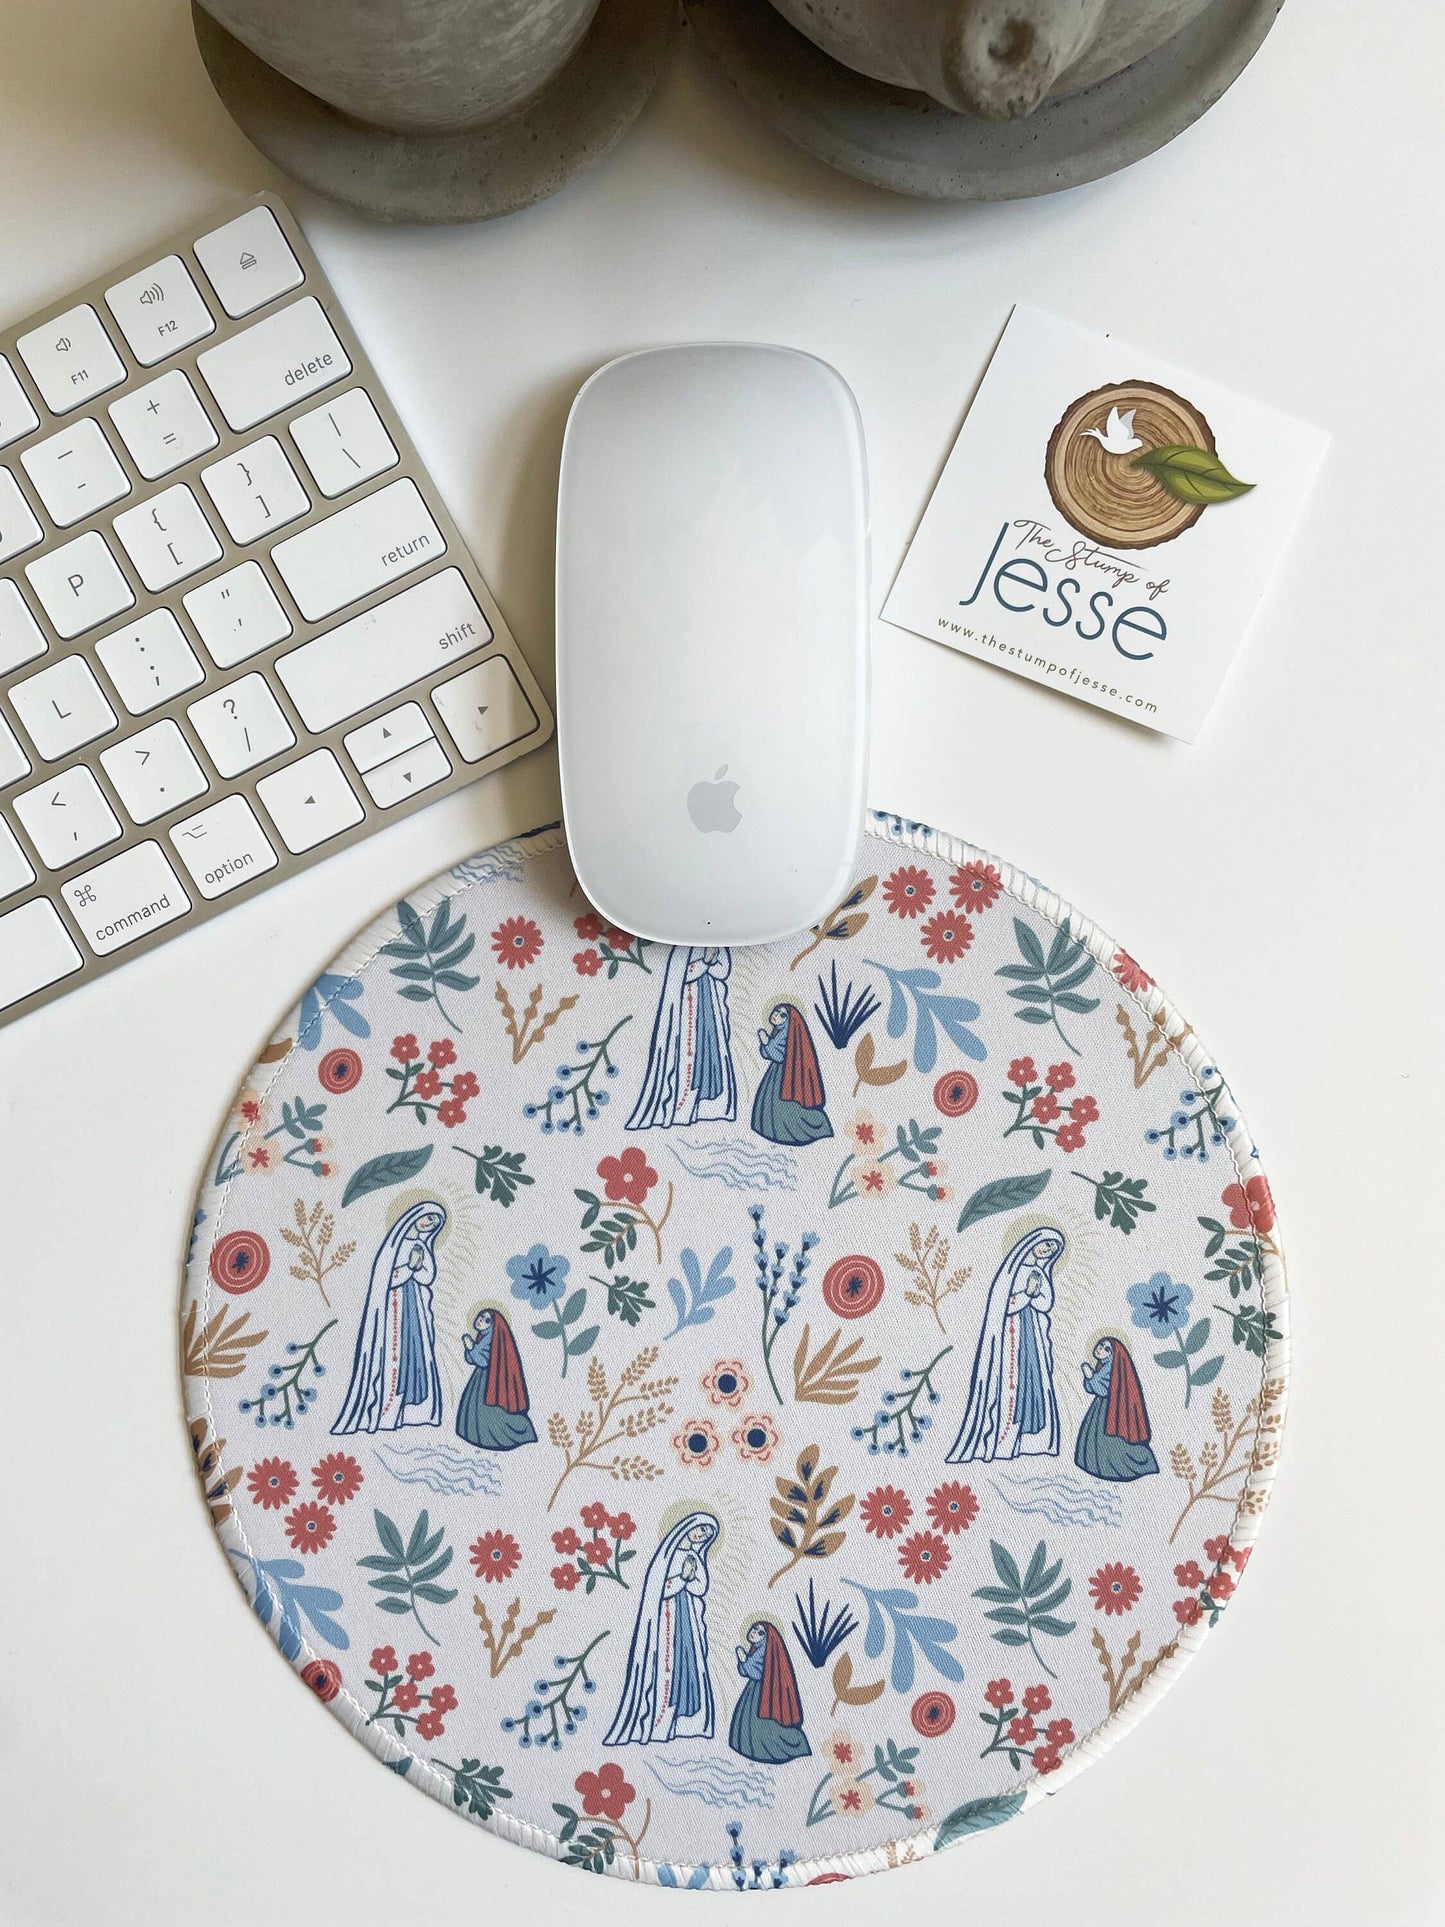 Our Lady of Lourdes Mouse Pad